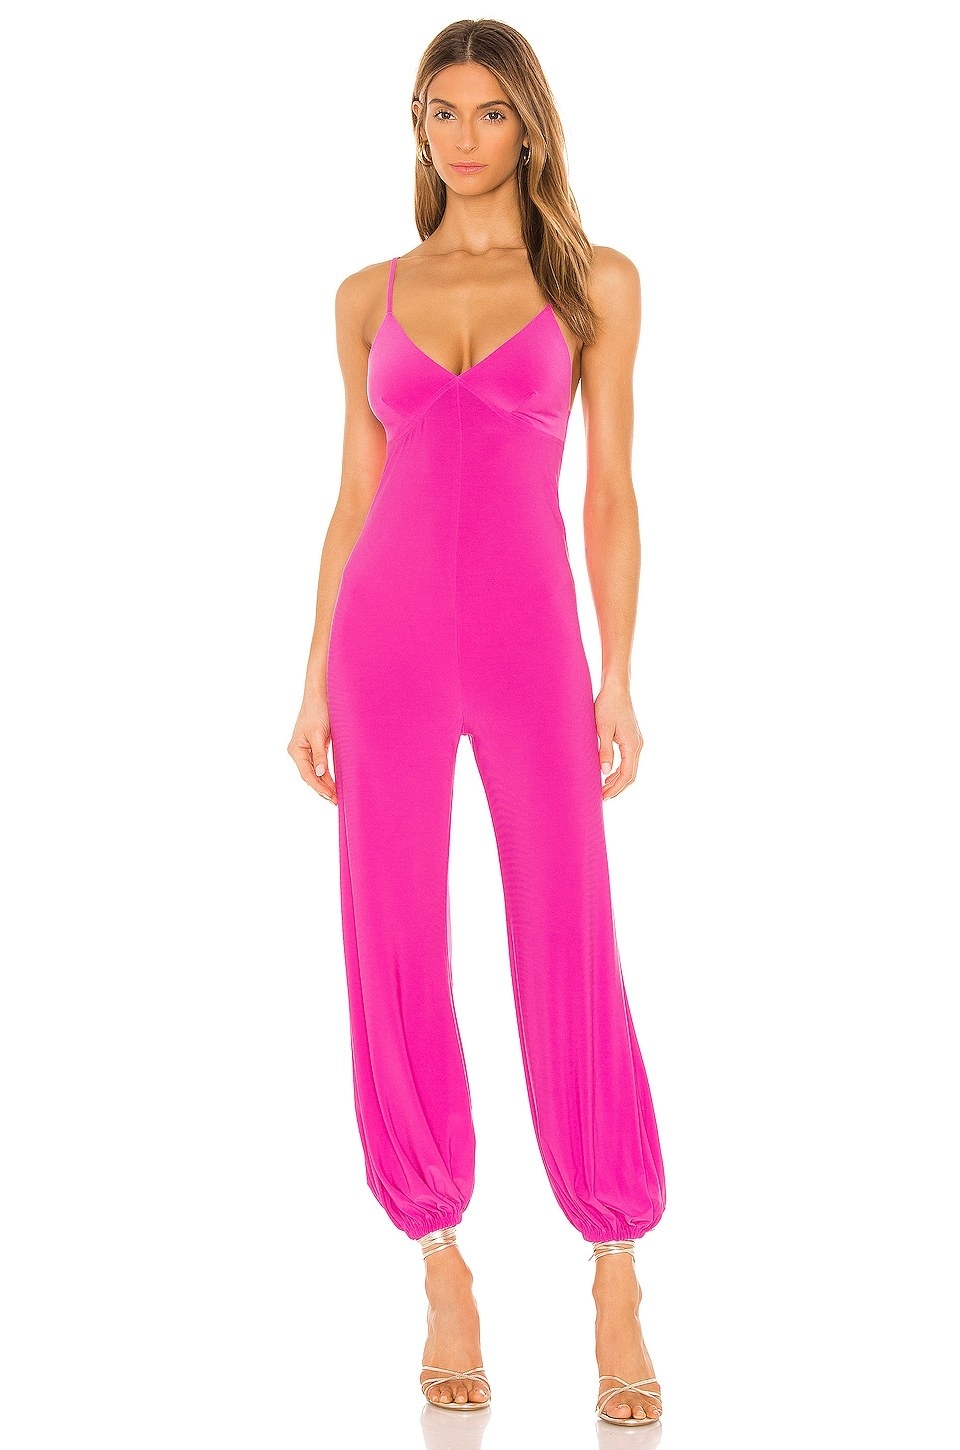 Model wearing pink jumpsuit cuffed at the ankles